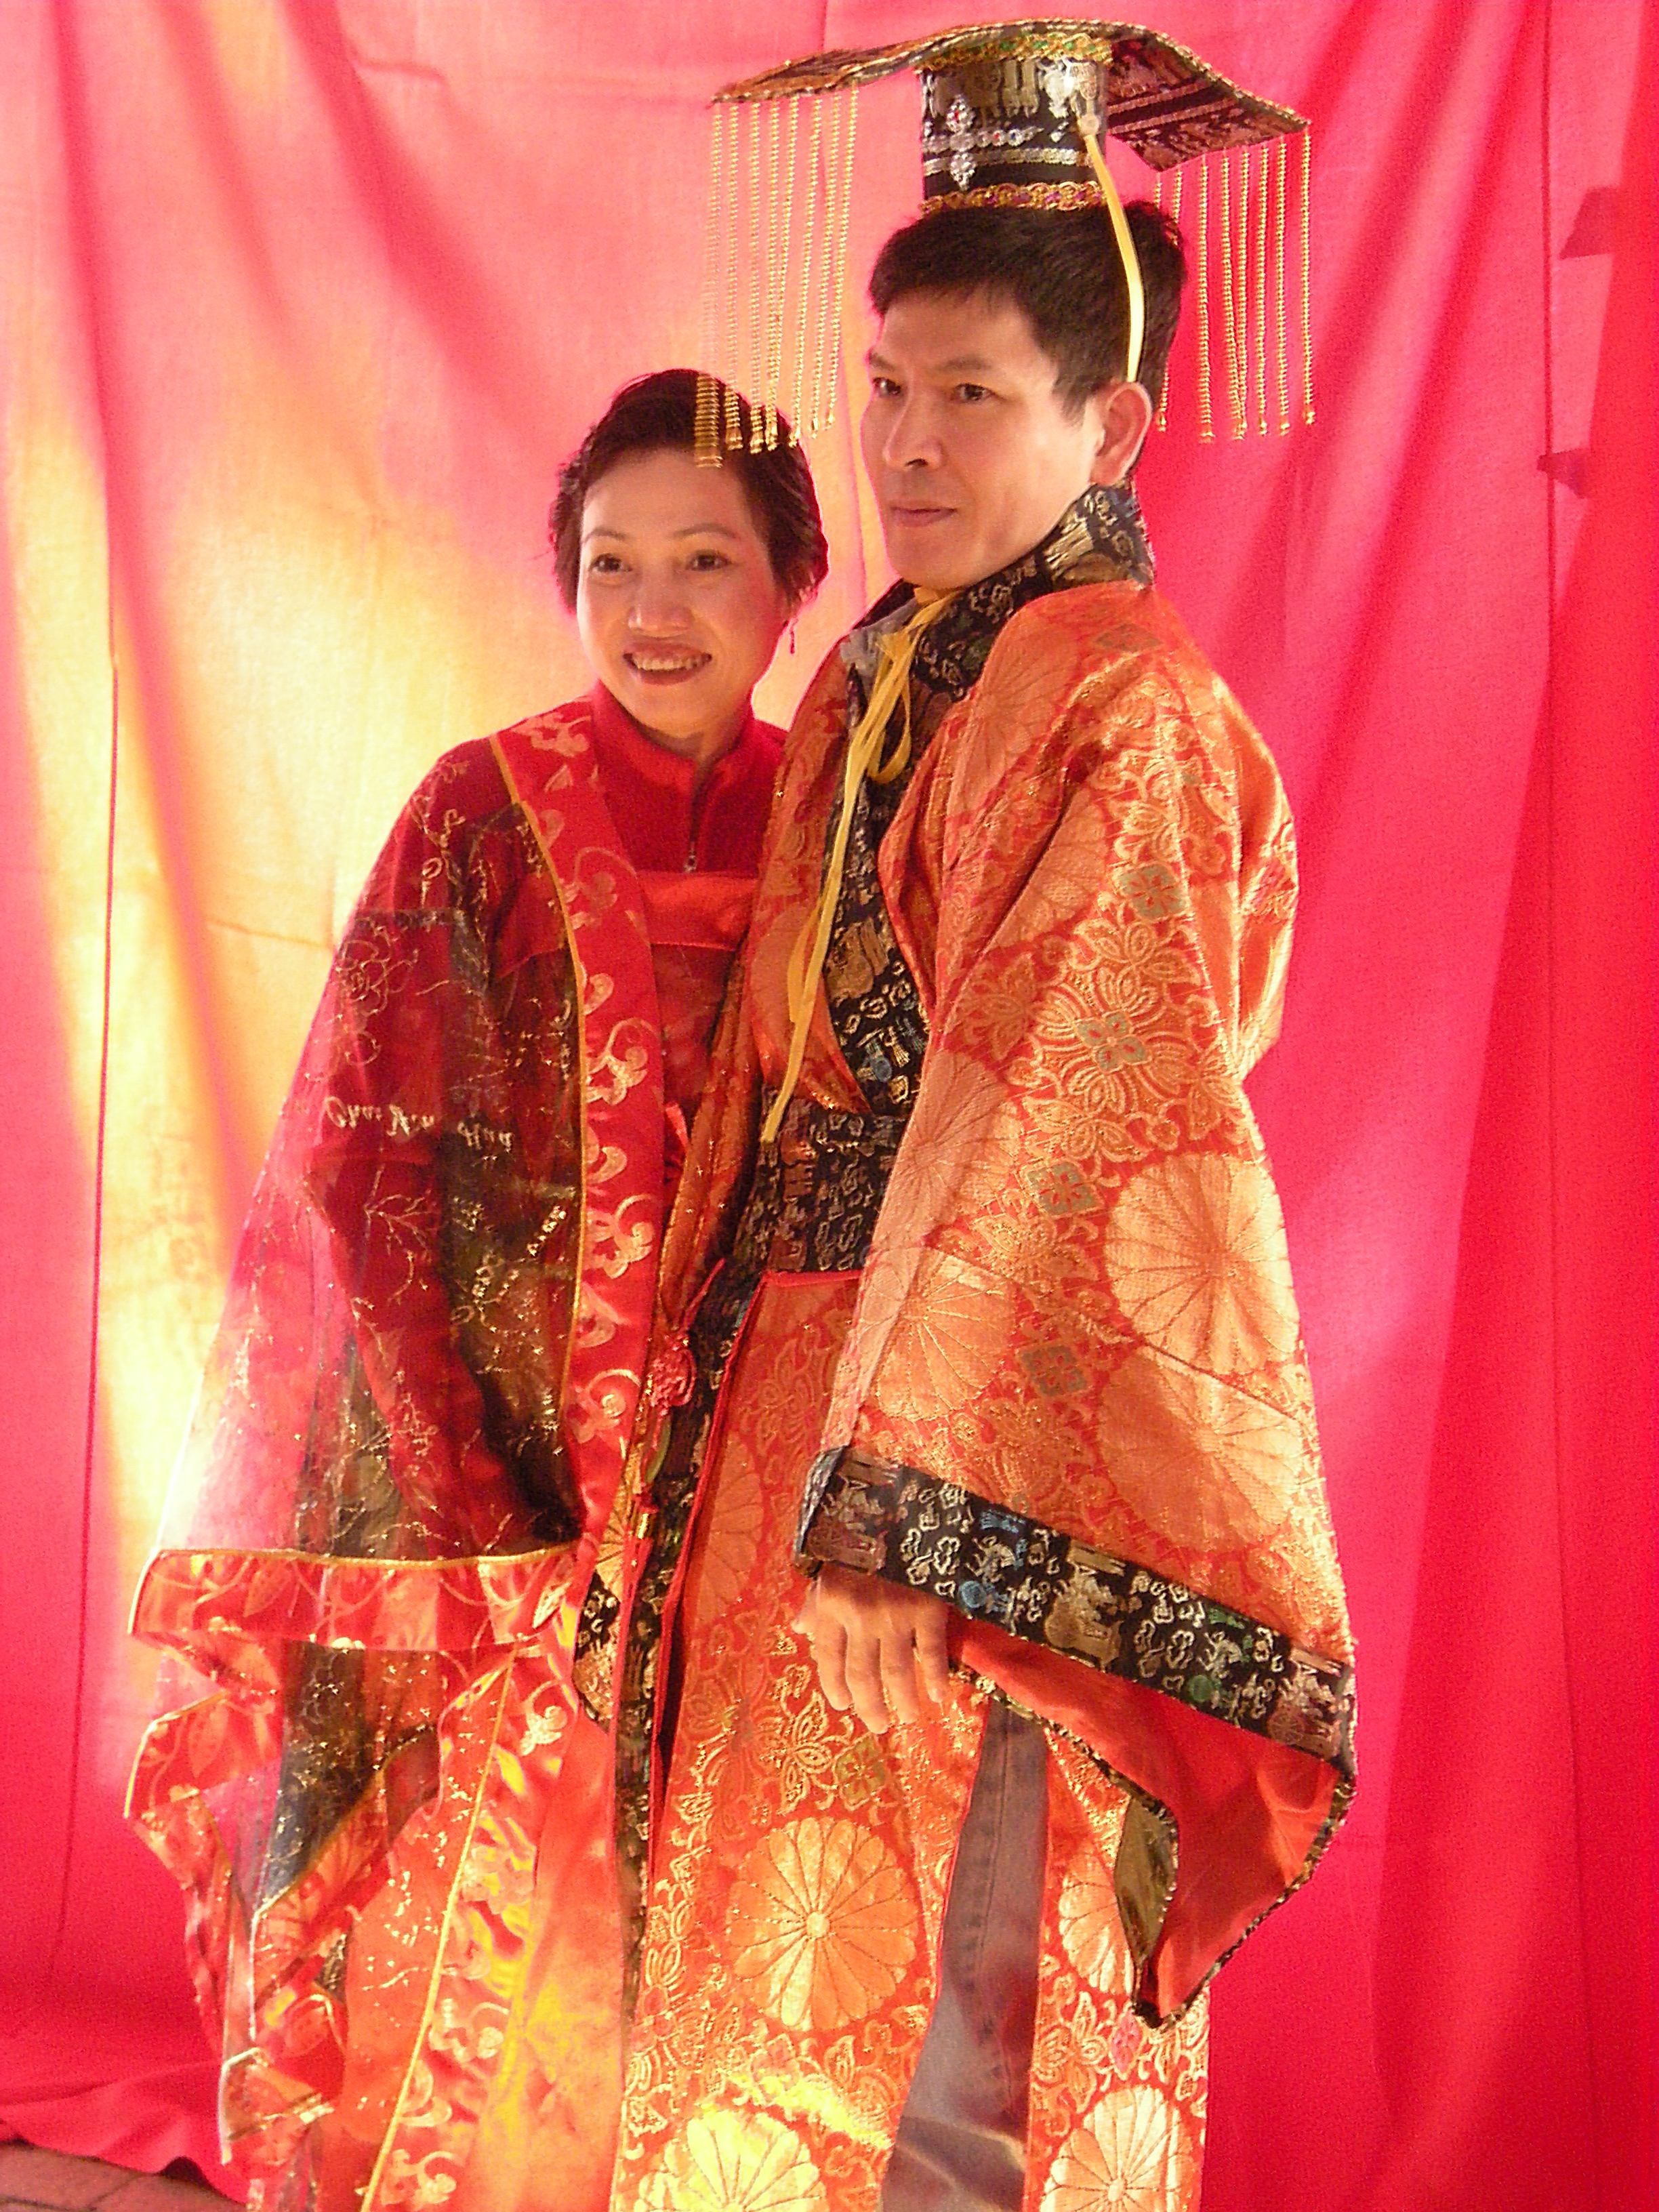 Chinese New Year Seattle 2009 - couple in traditional dress